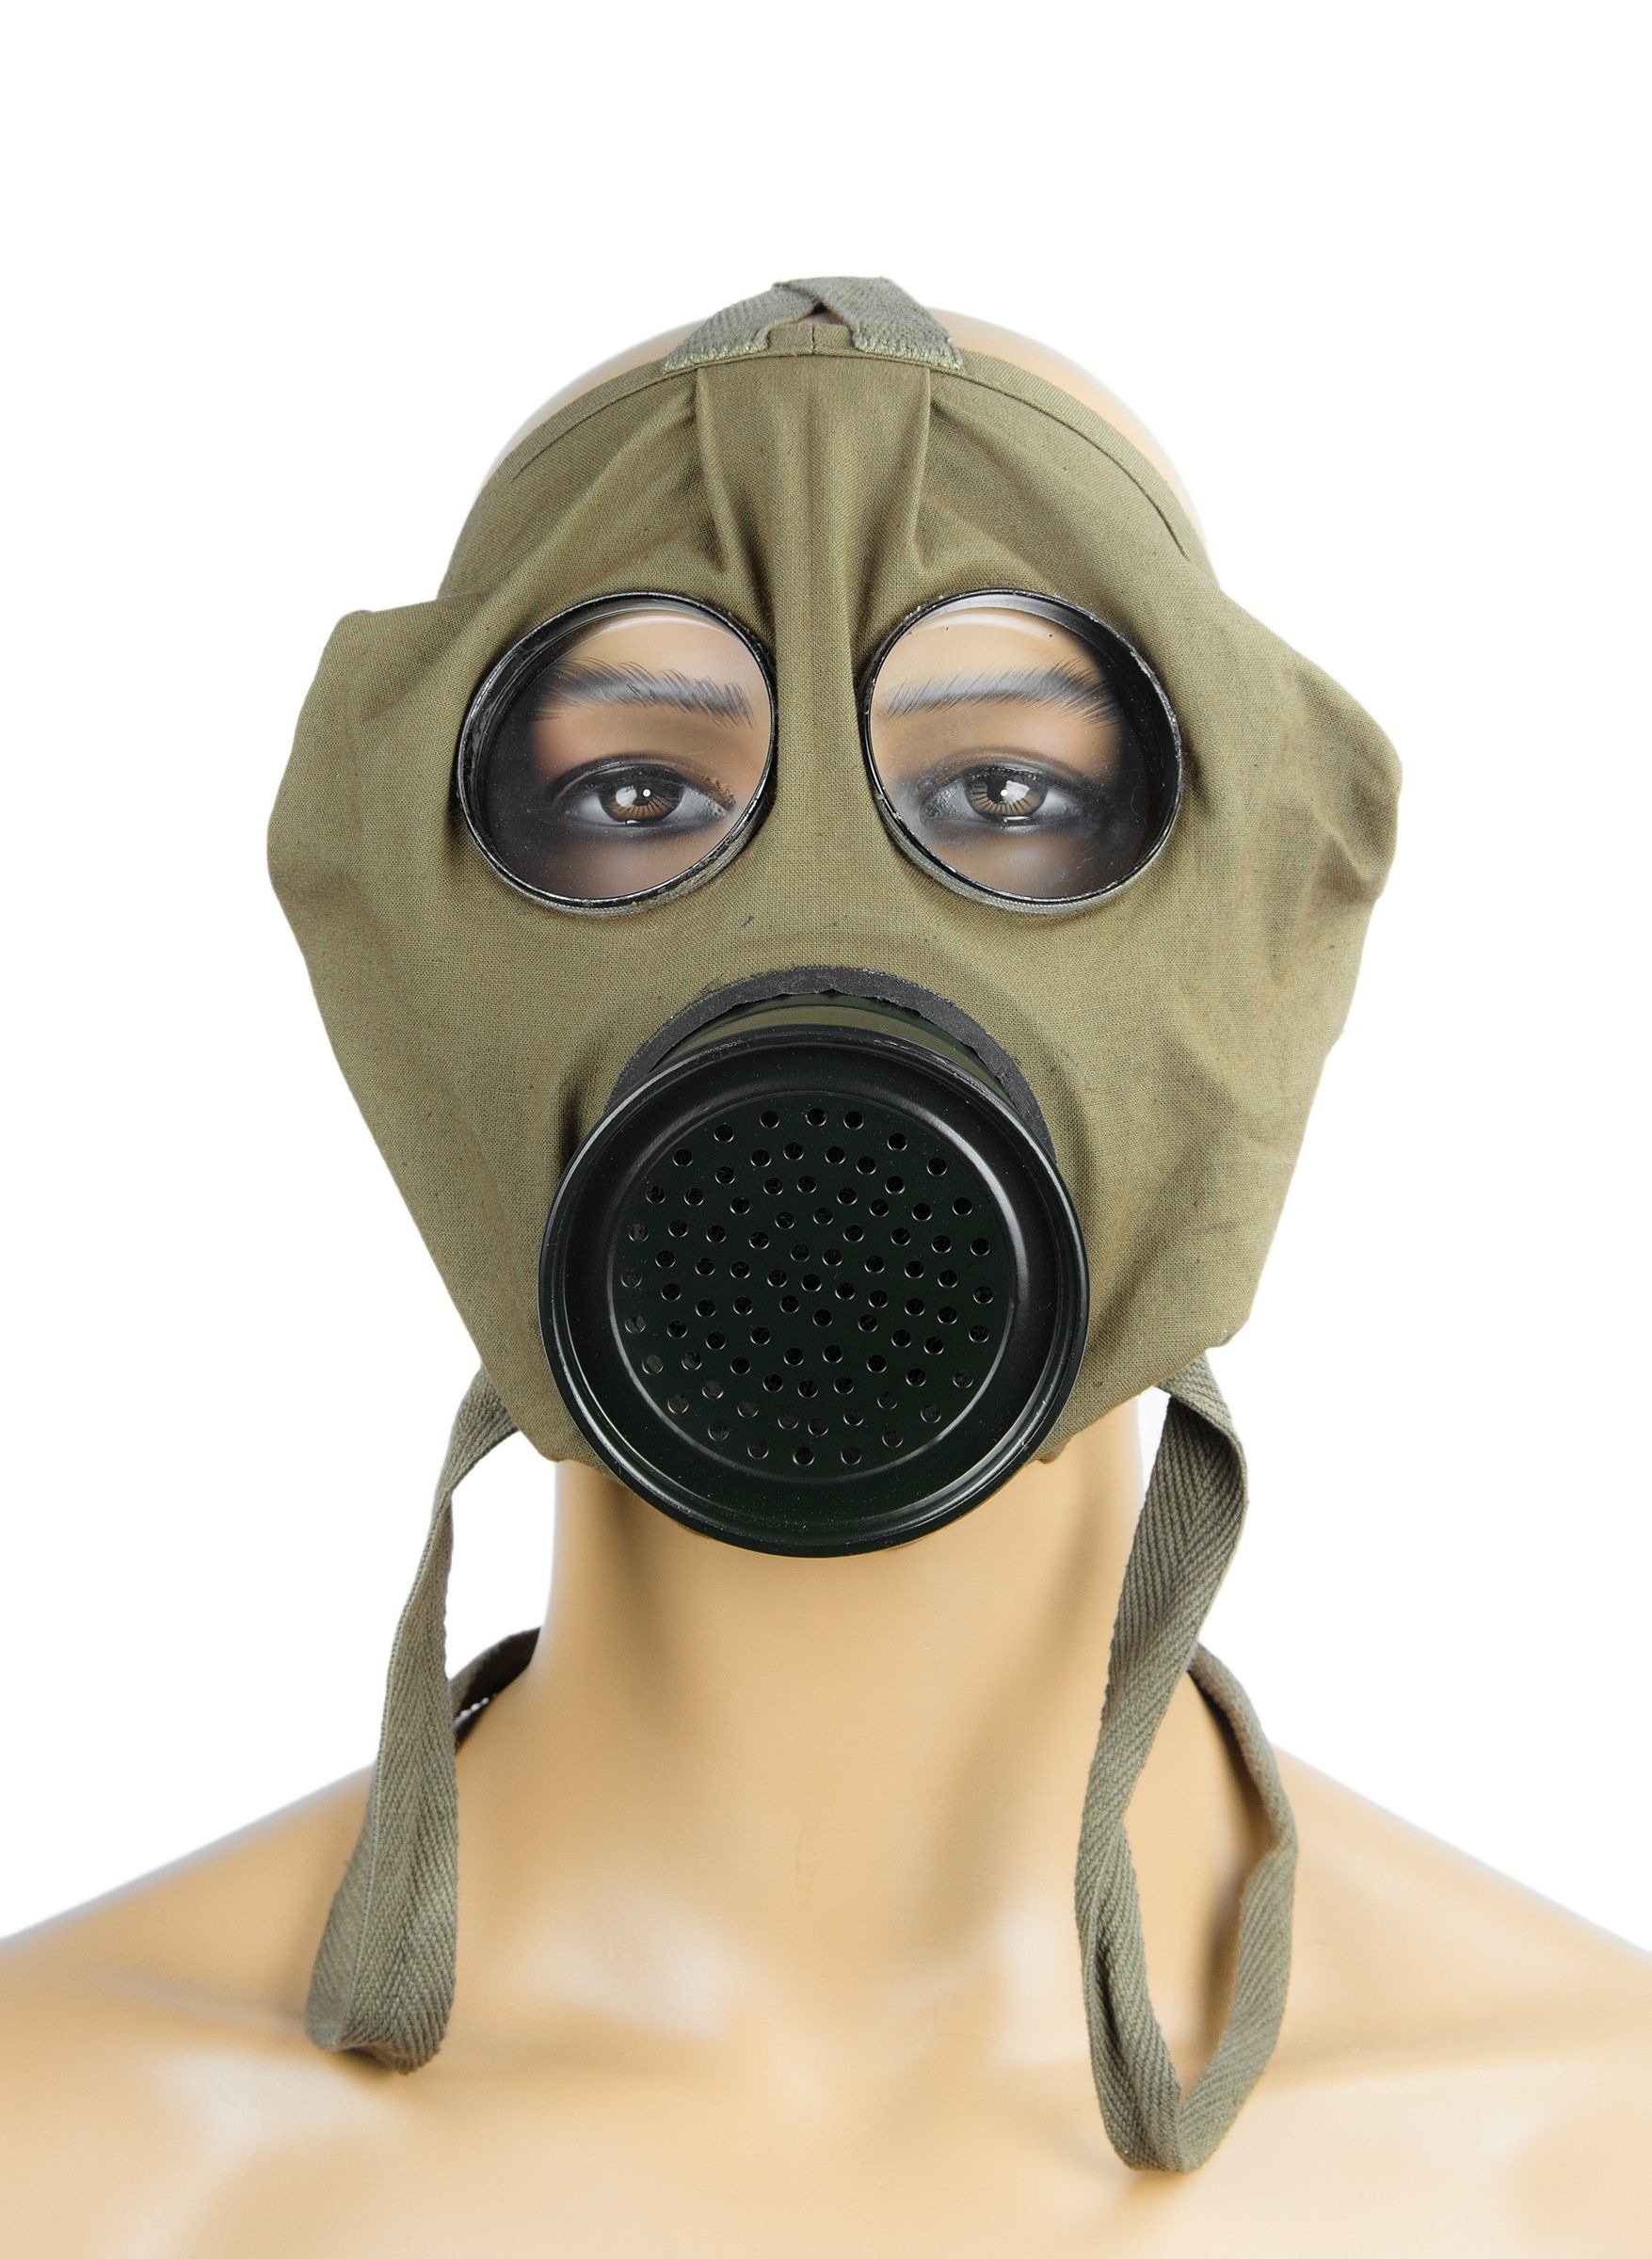 polish gas mask with filter